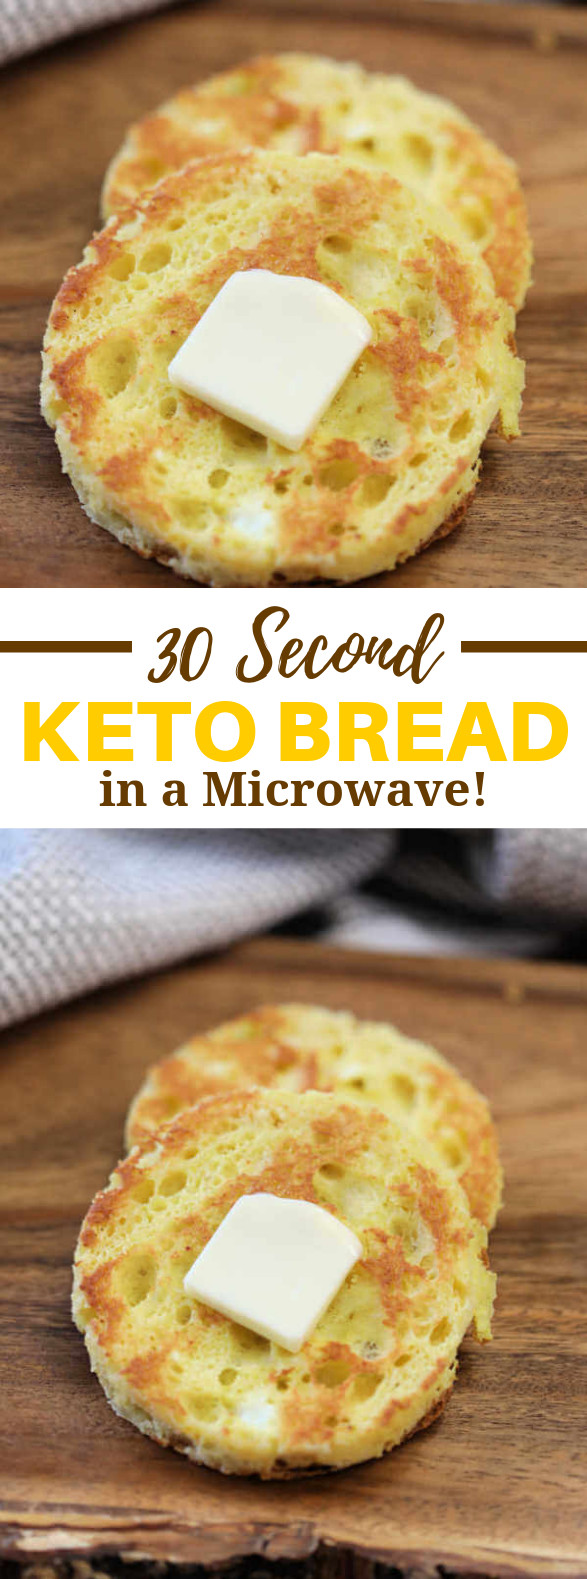 3 Ingredient 90 Second Keto Bread
 THE BEST 90 SECOND BREAD RECIPE keto lunch